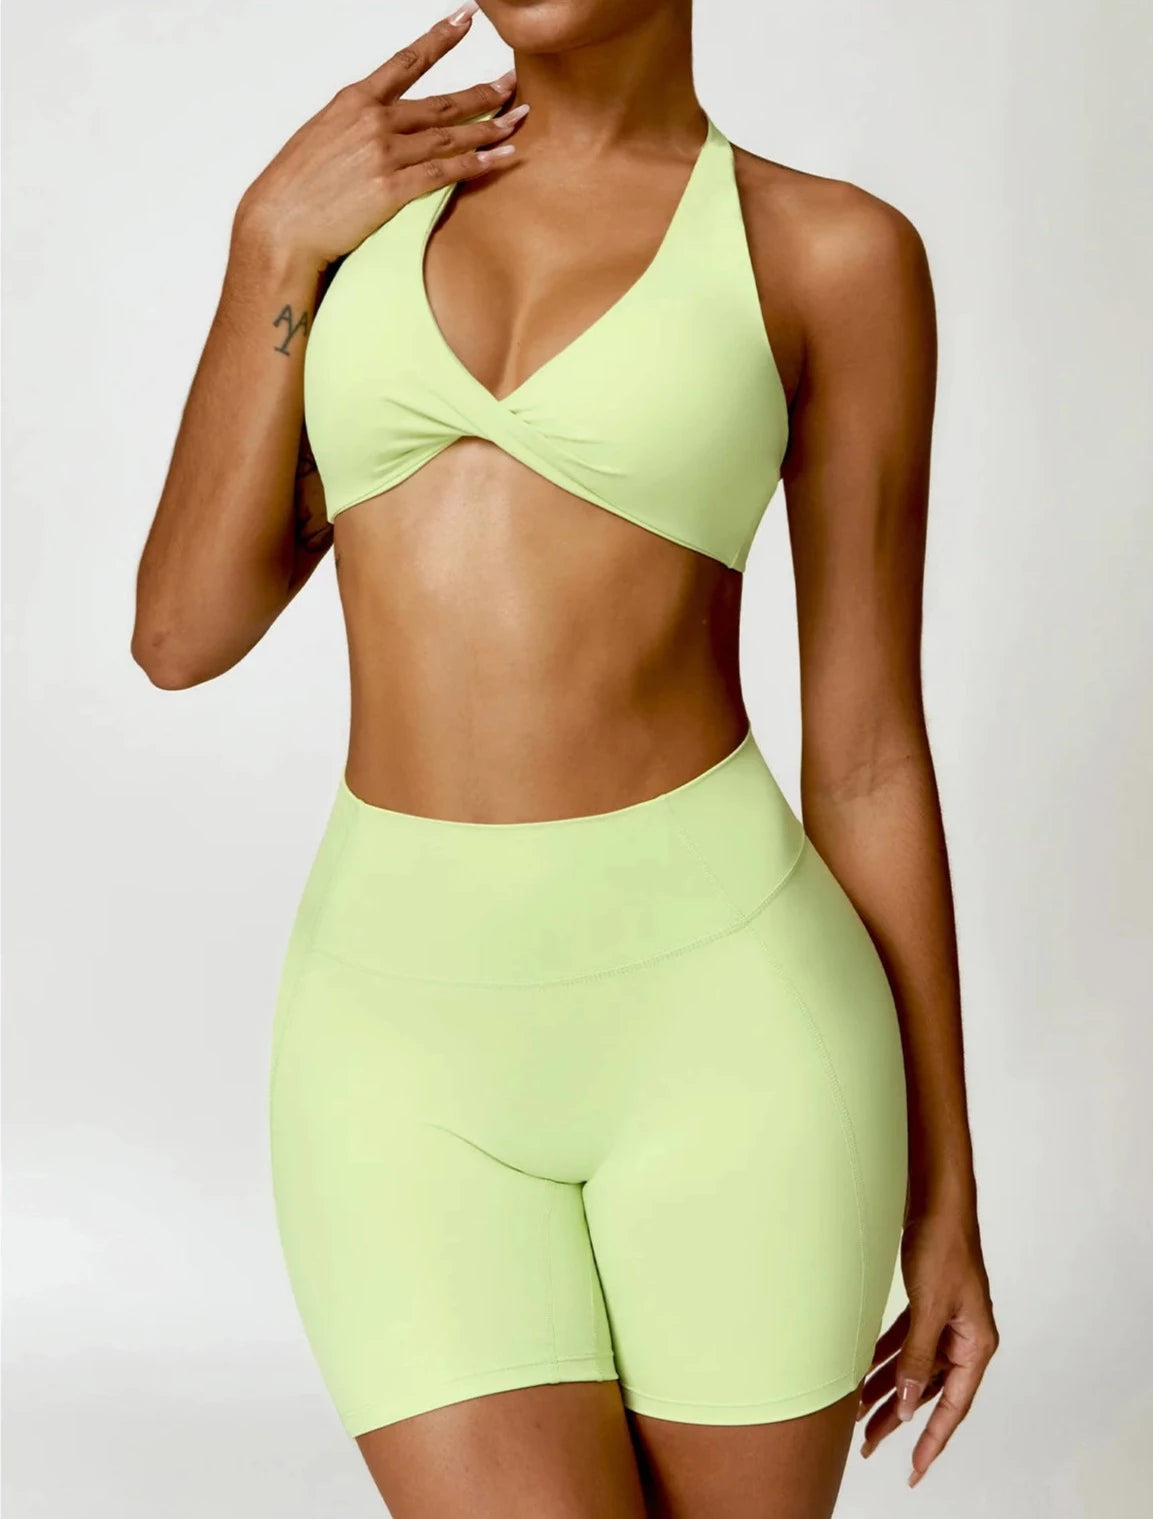 Glam Flow Yoga Set - Shorts + Top Sets Starlethics Yellow Green S 